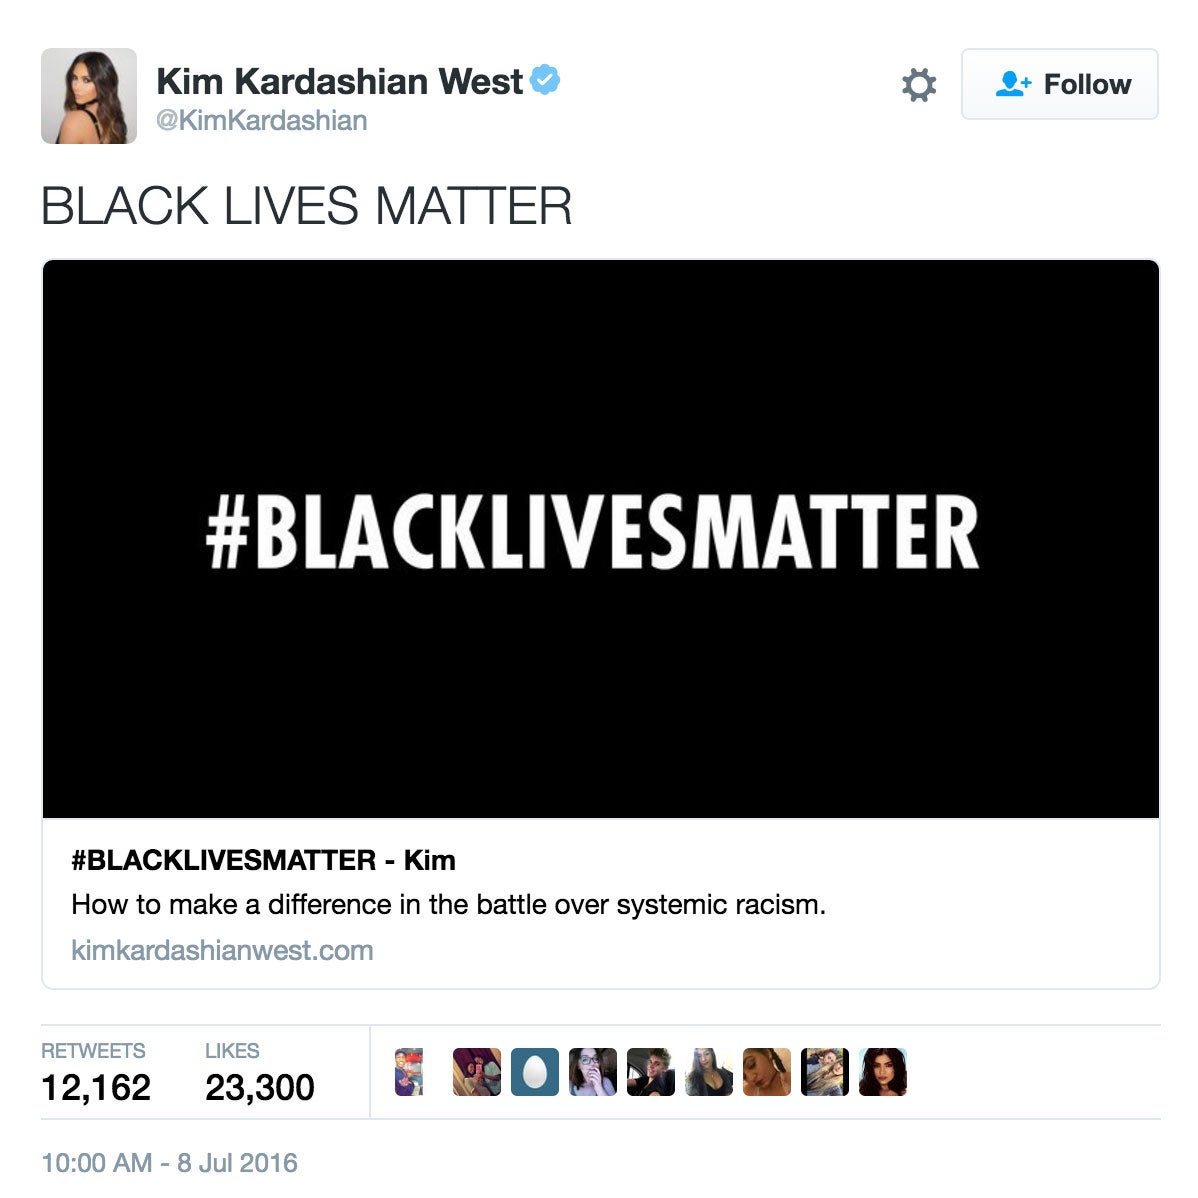 10 Non-Black Celebrities Who Have Spoken Out In Support Of Black Lives Matter
